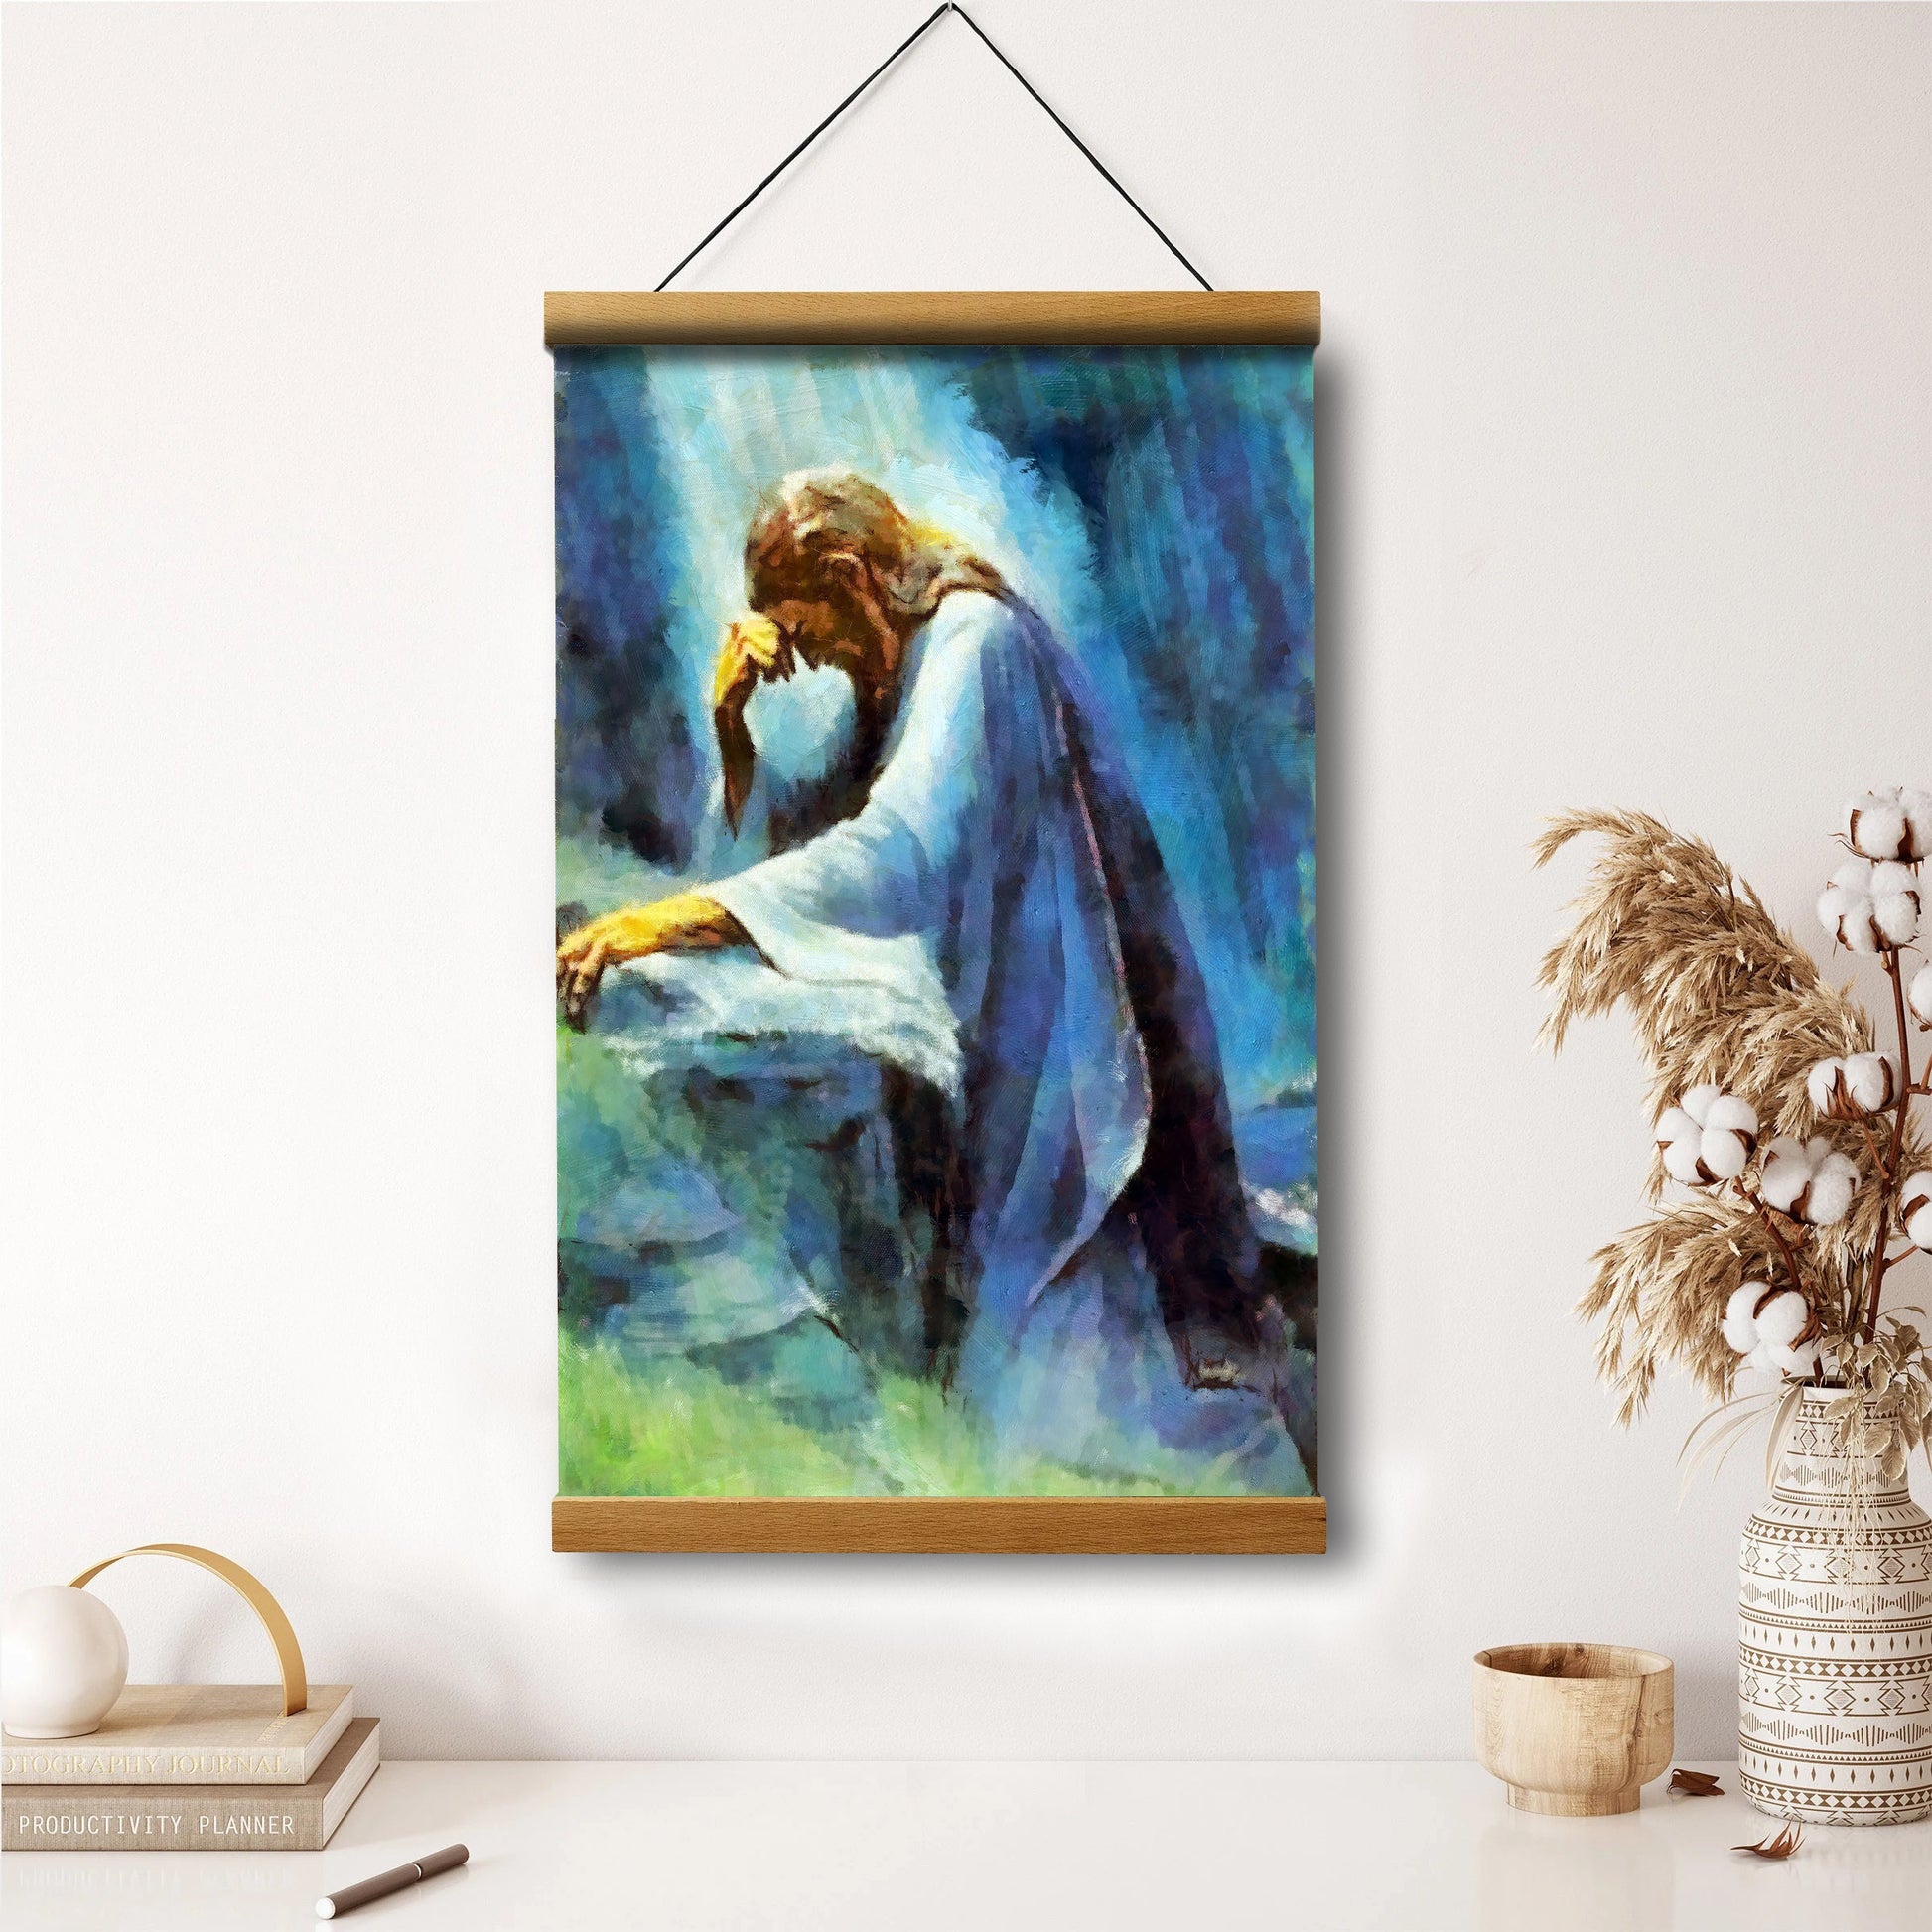 Jesus In Prayer Hanging Canvas Wall Art - Jesus Portrait Picture - Religious Gift - Christian Wall Art Decor